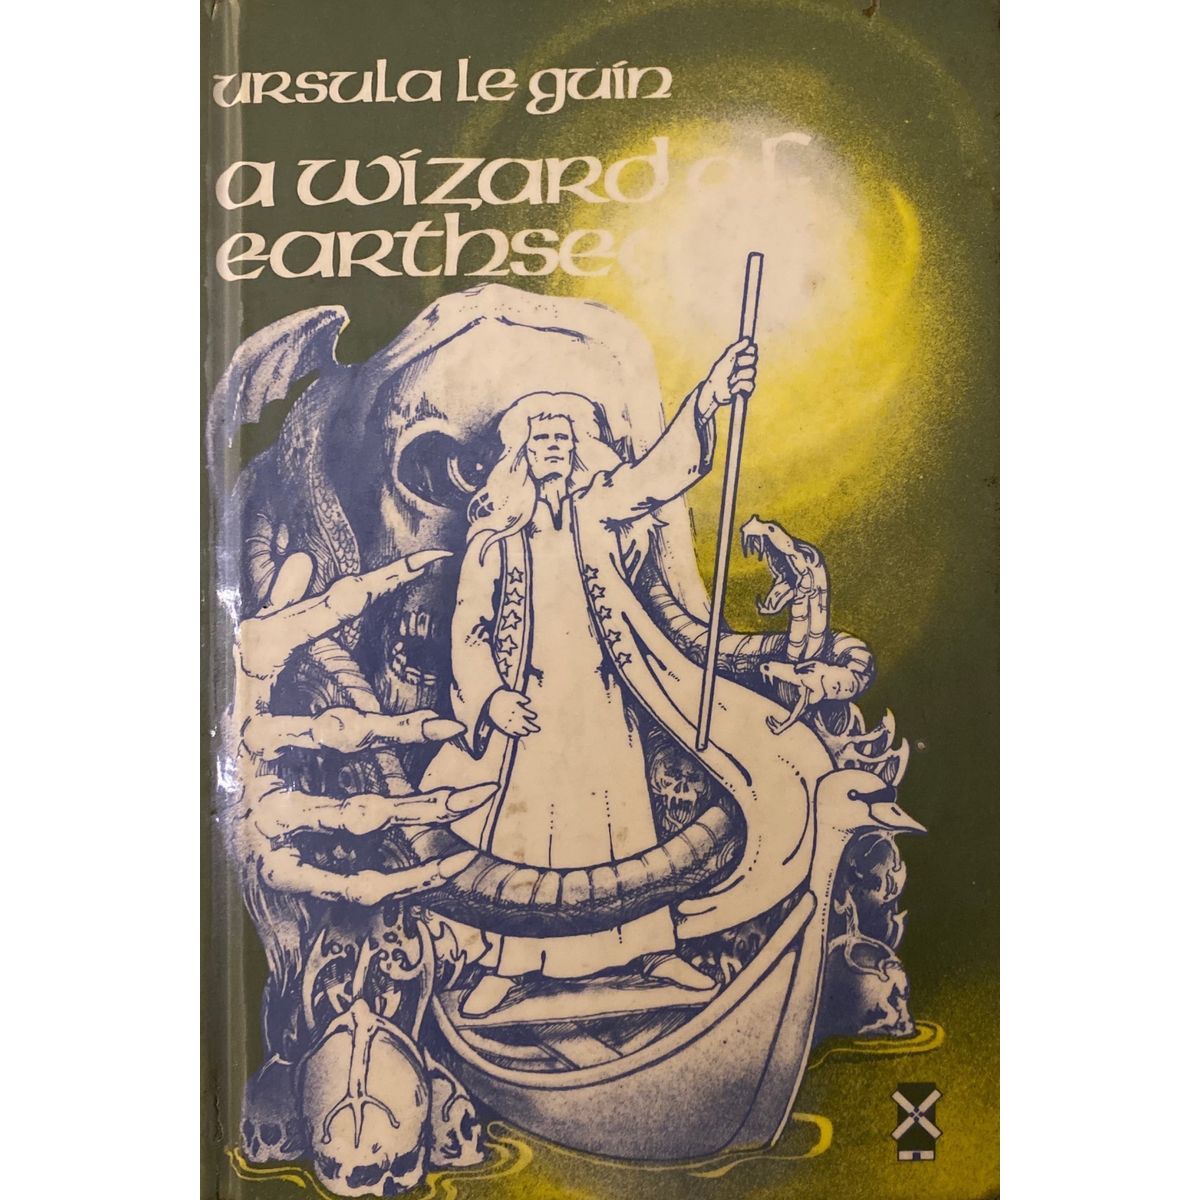 ISBN: 9780435121723 / 0435121723 - A Wizard of Earthsea by Ursula Le Guin [1973]